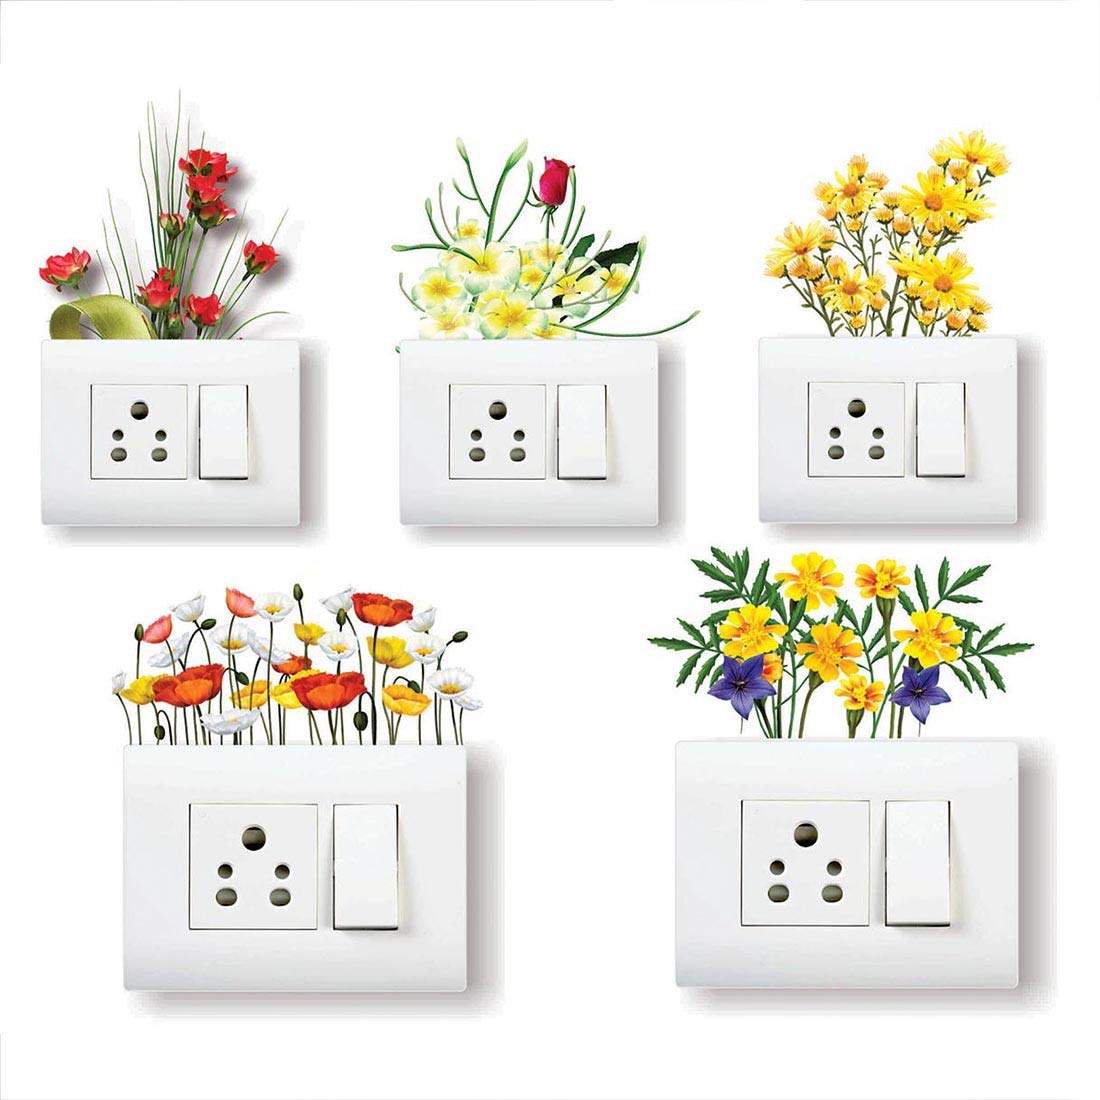 Best switchboard stickers for home in India | Business ...